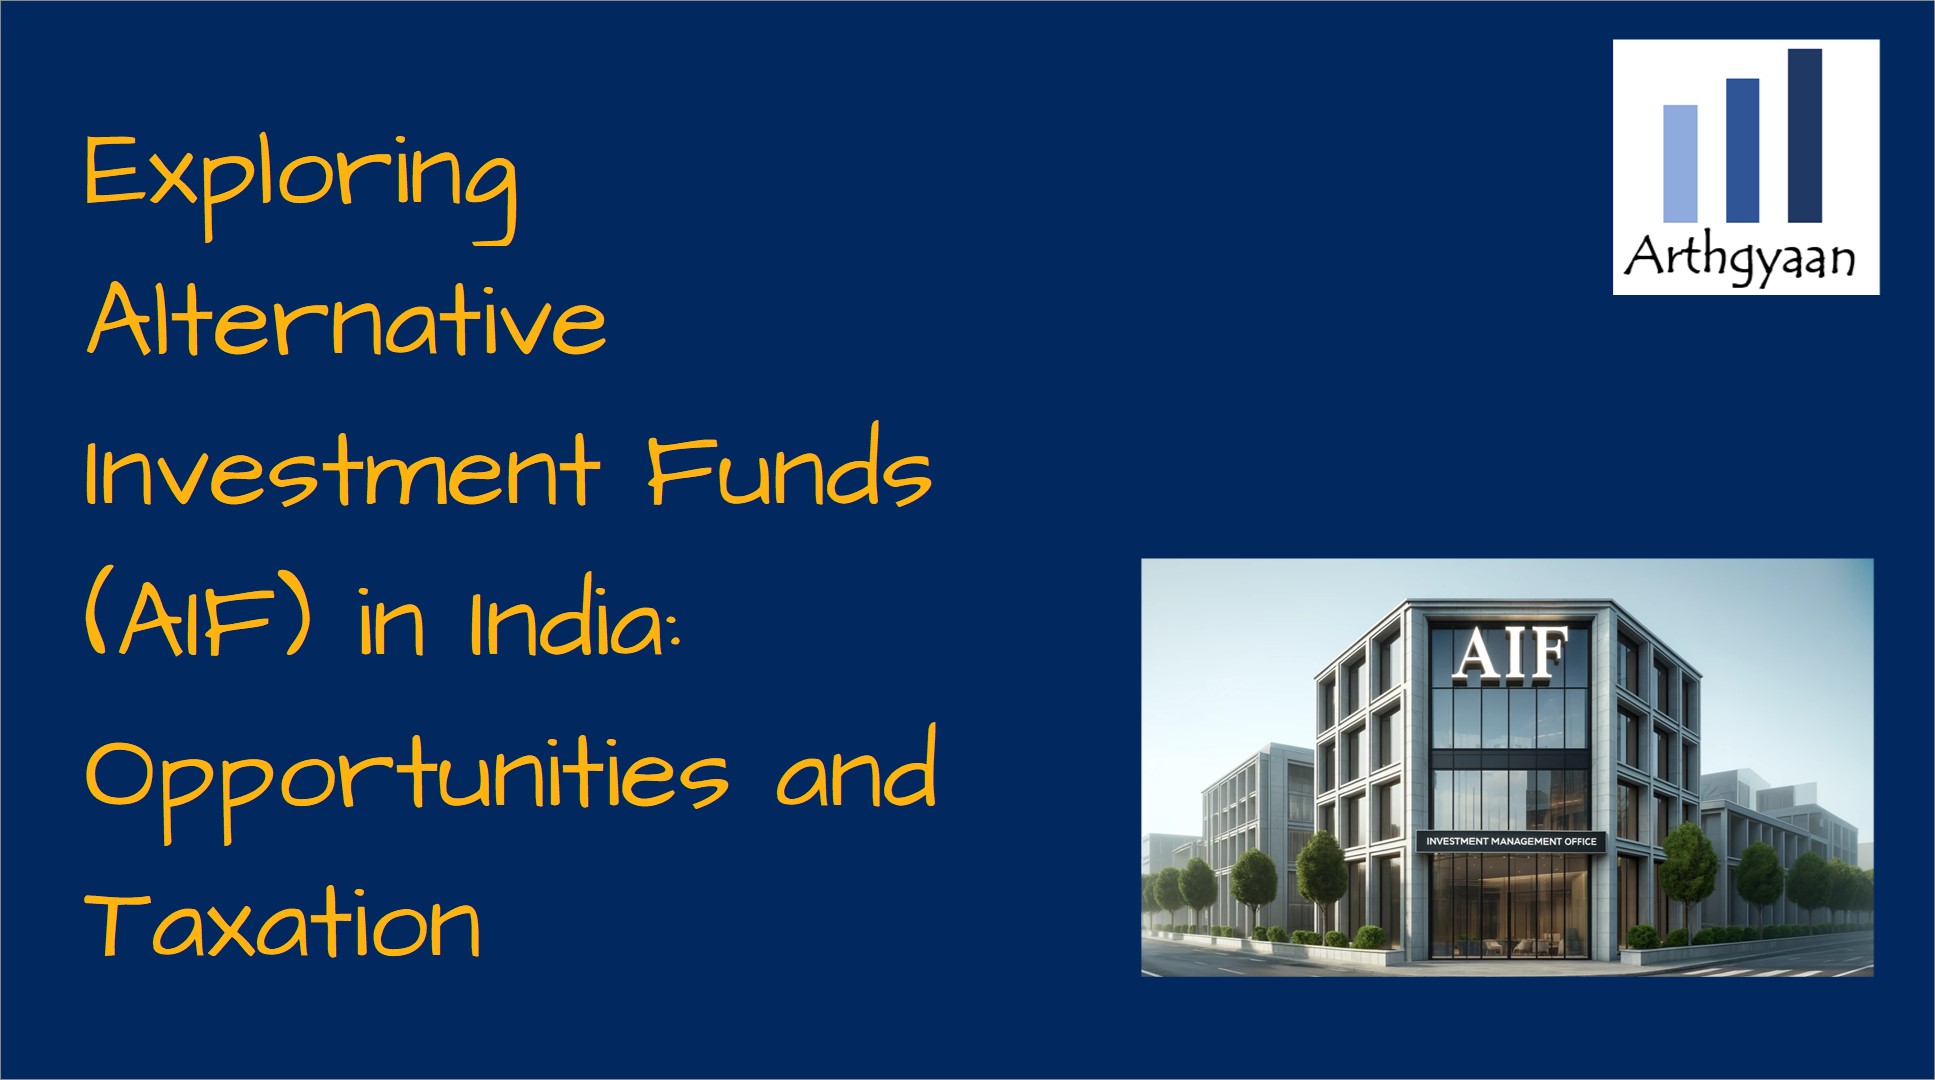 Exploring Alternative Investment Funds (AIF) in India: Opportunities and Taxation